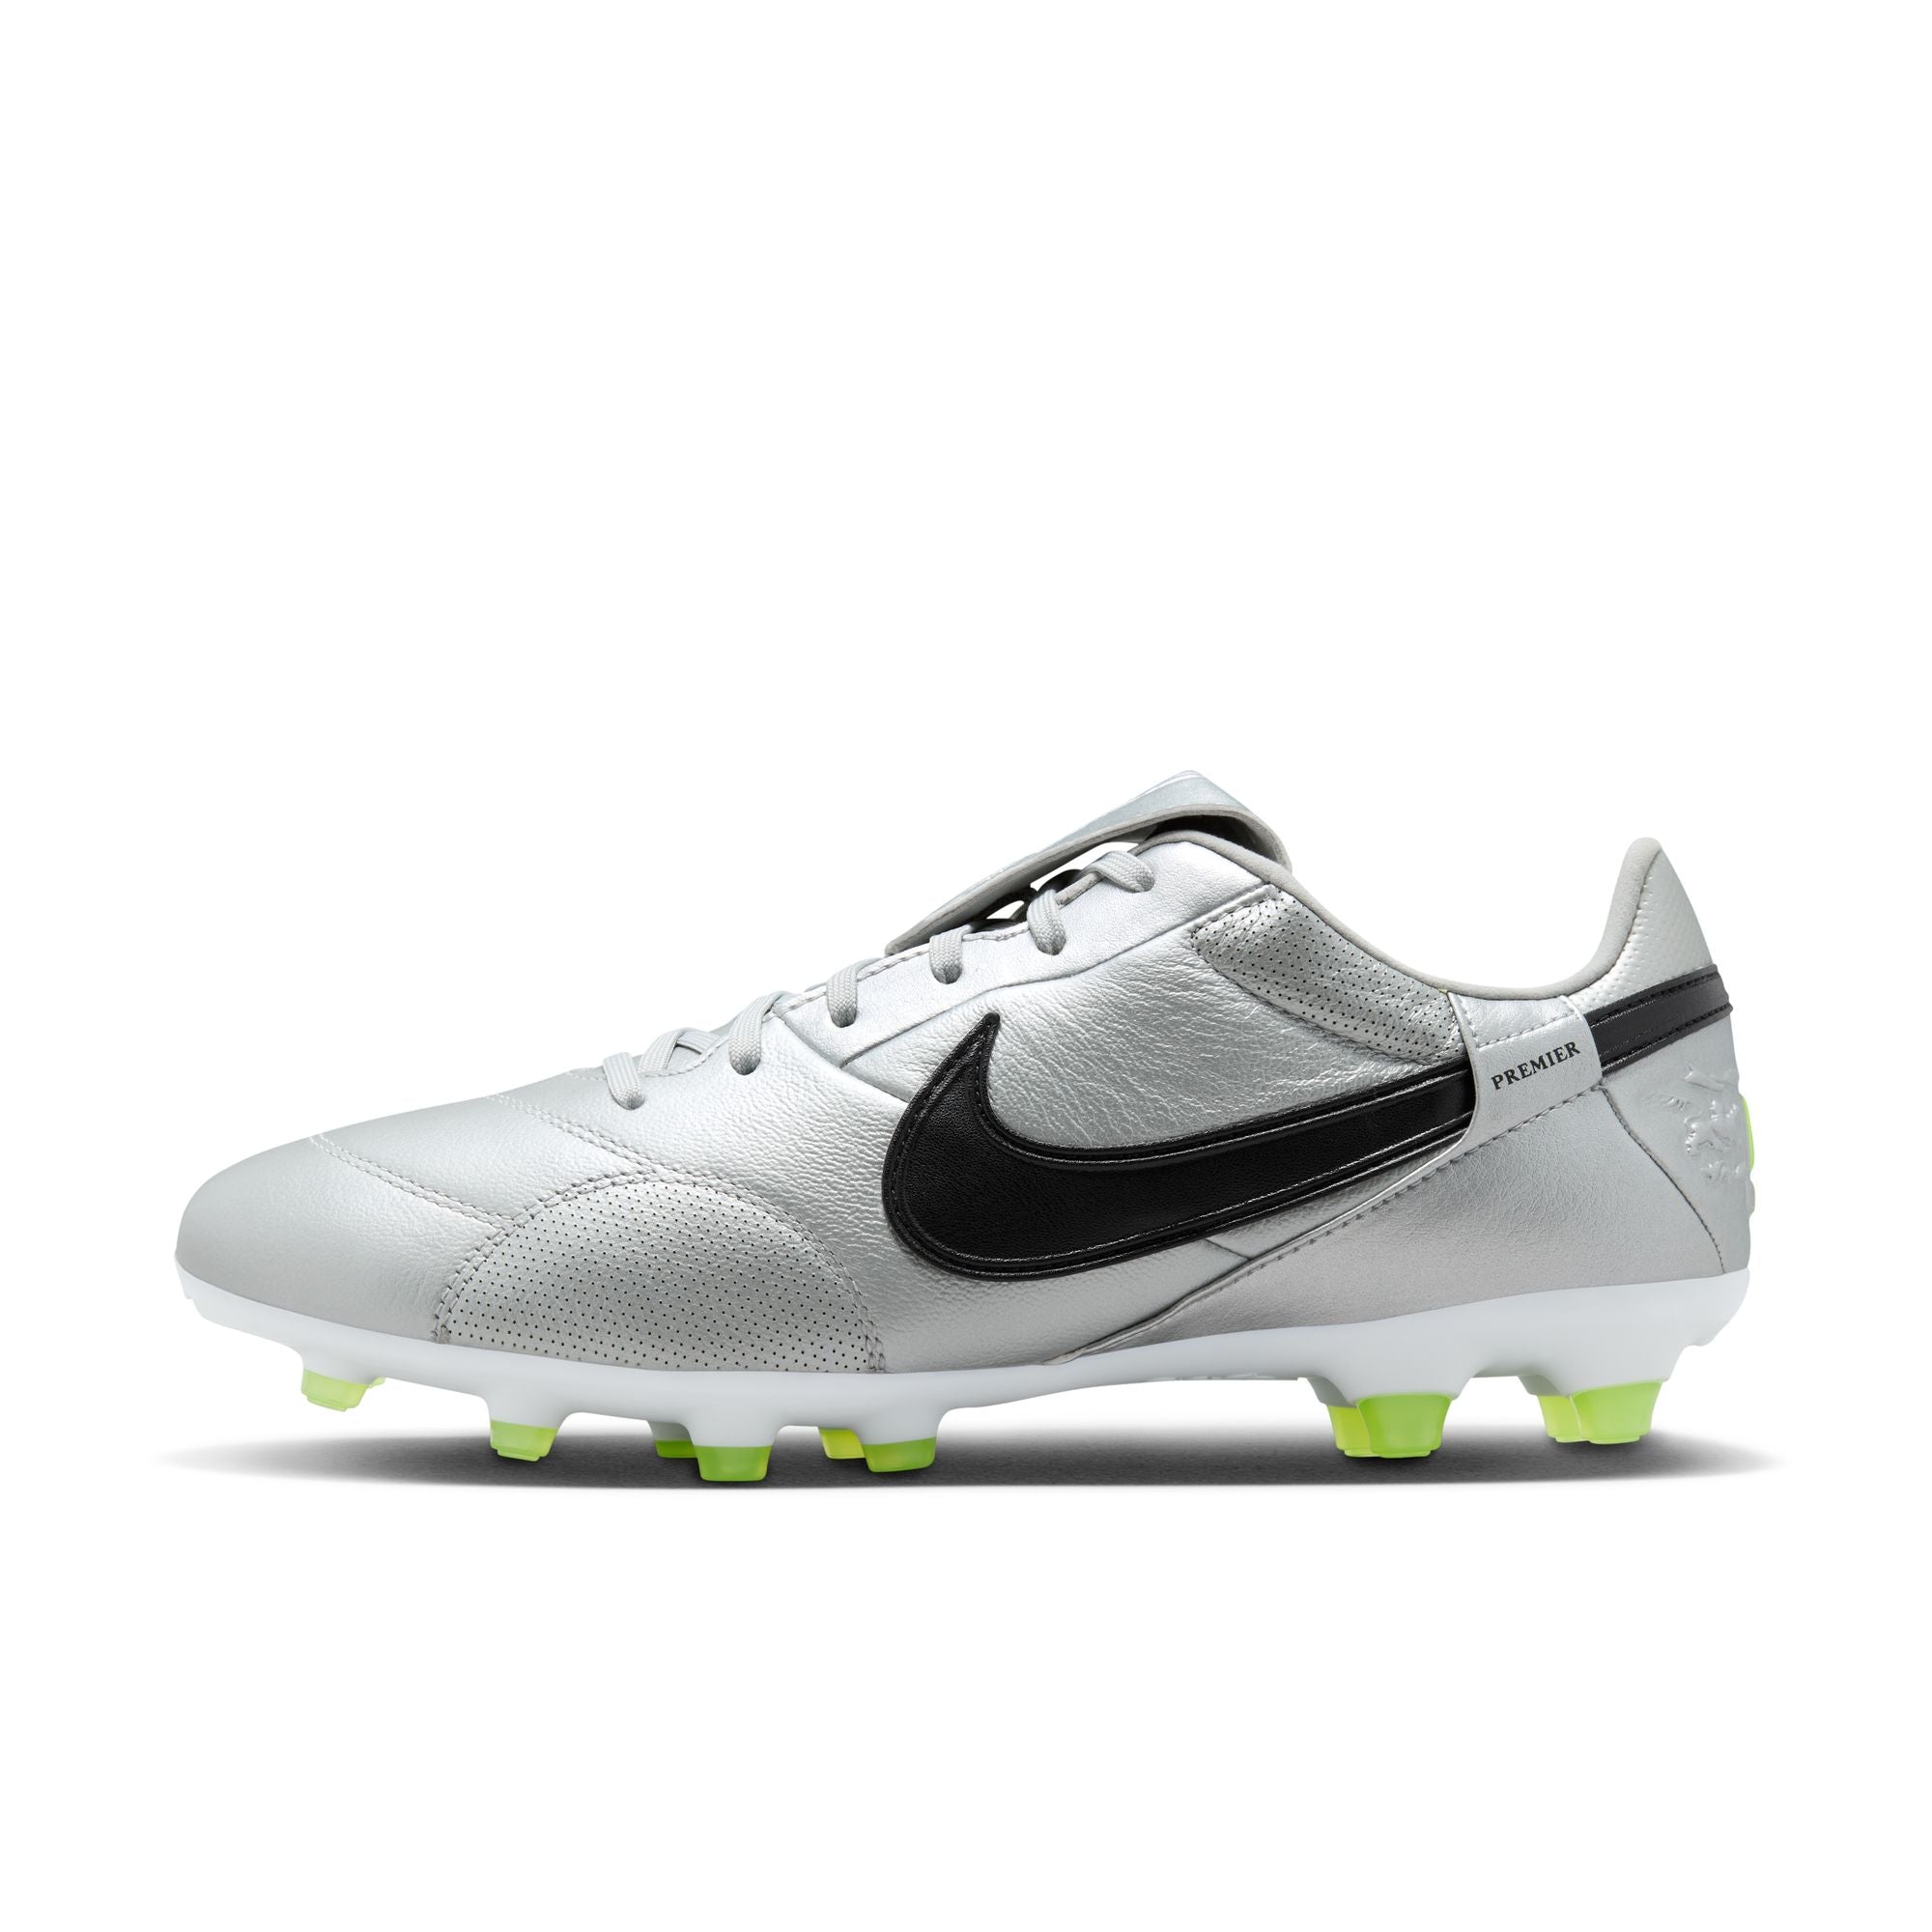 Nike Premier 3 Firm-Ground Soccer Cleats